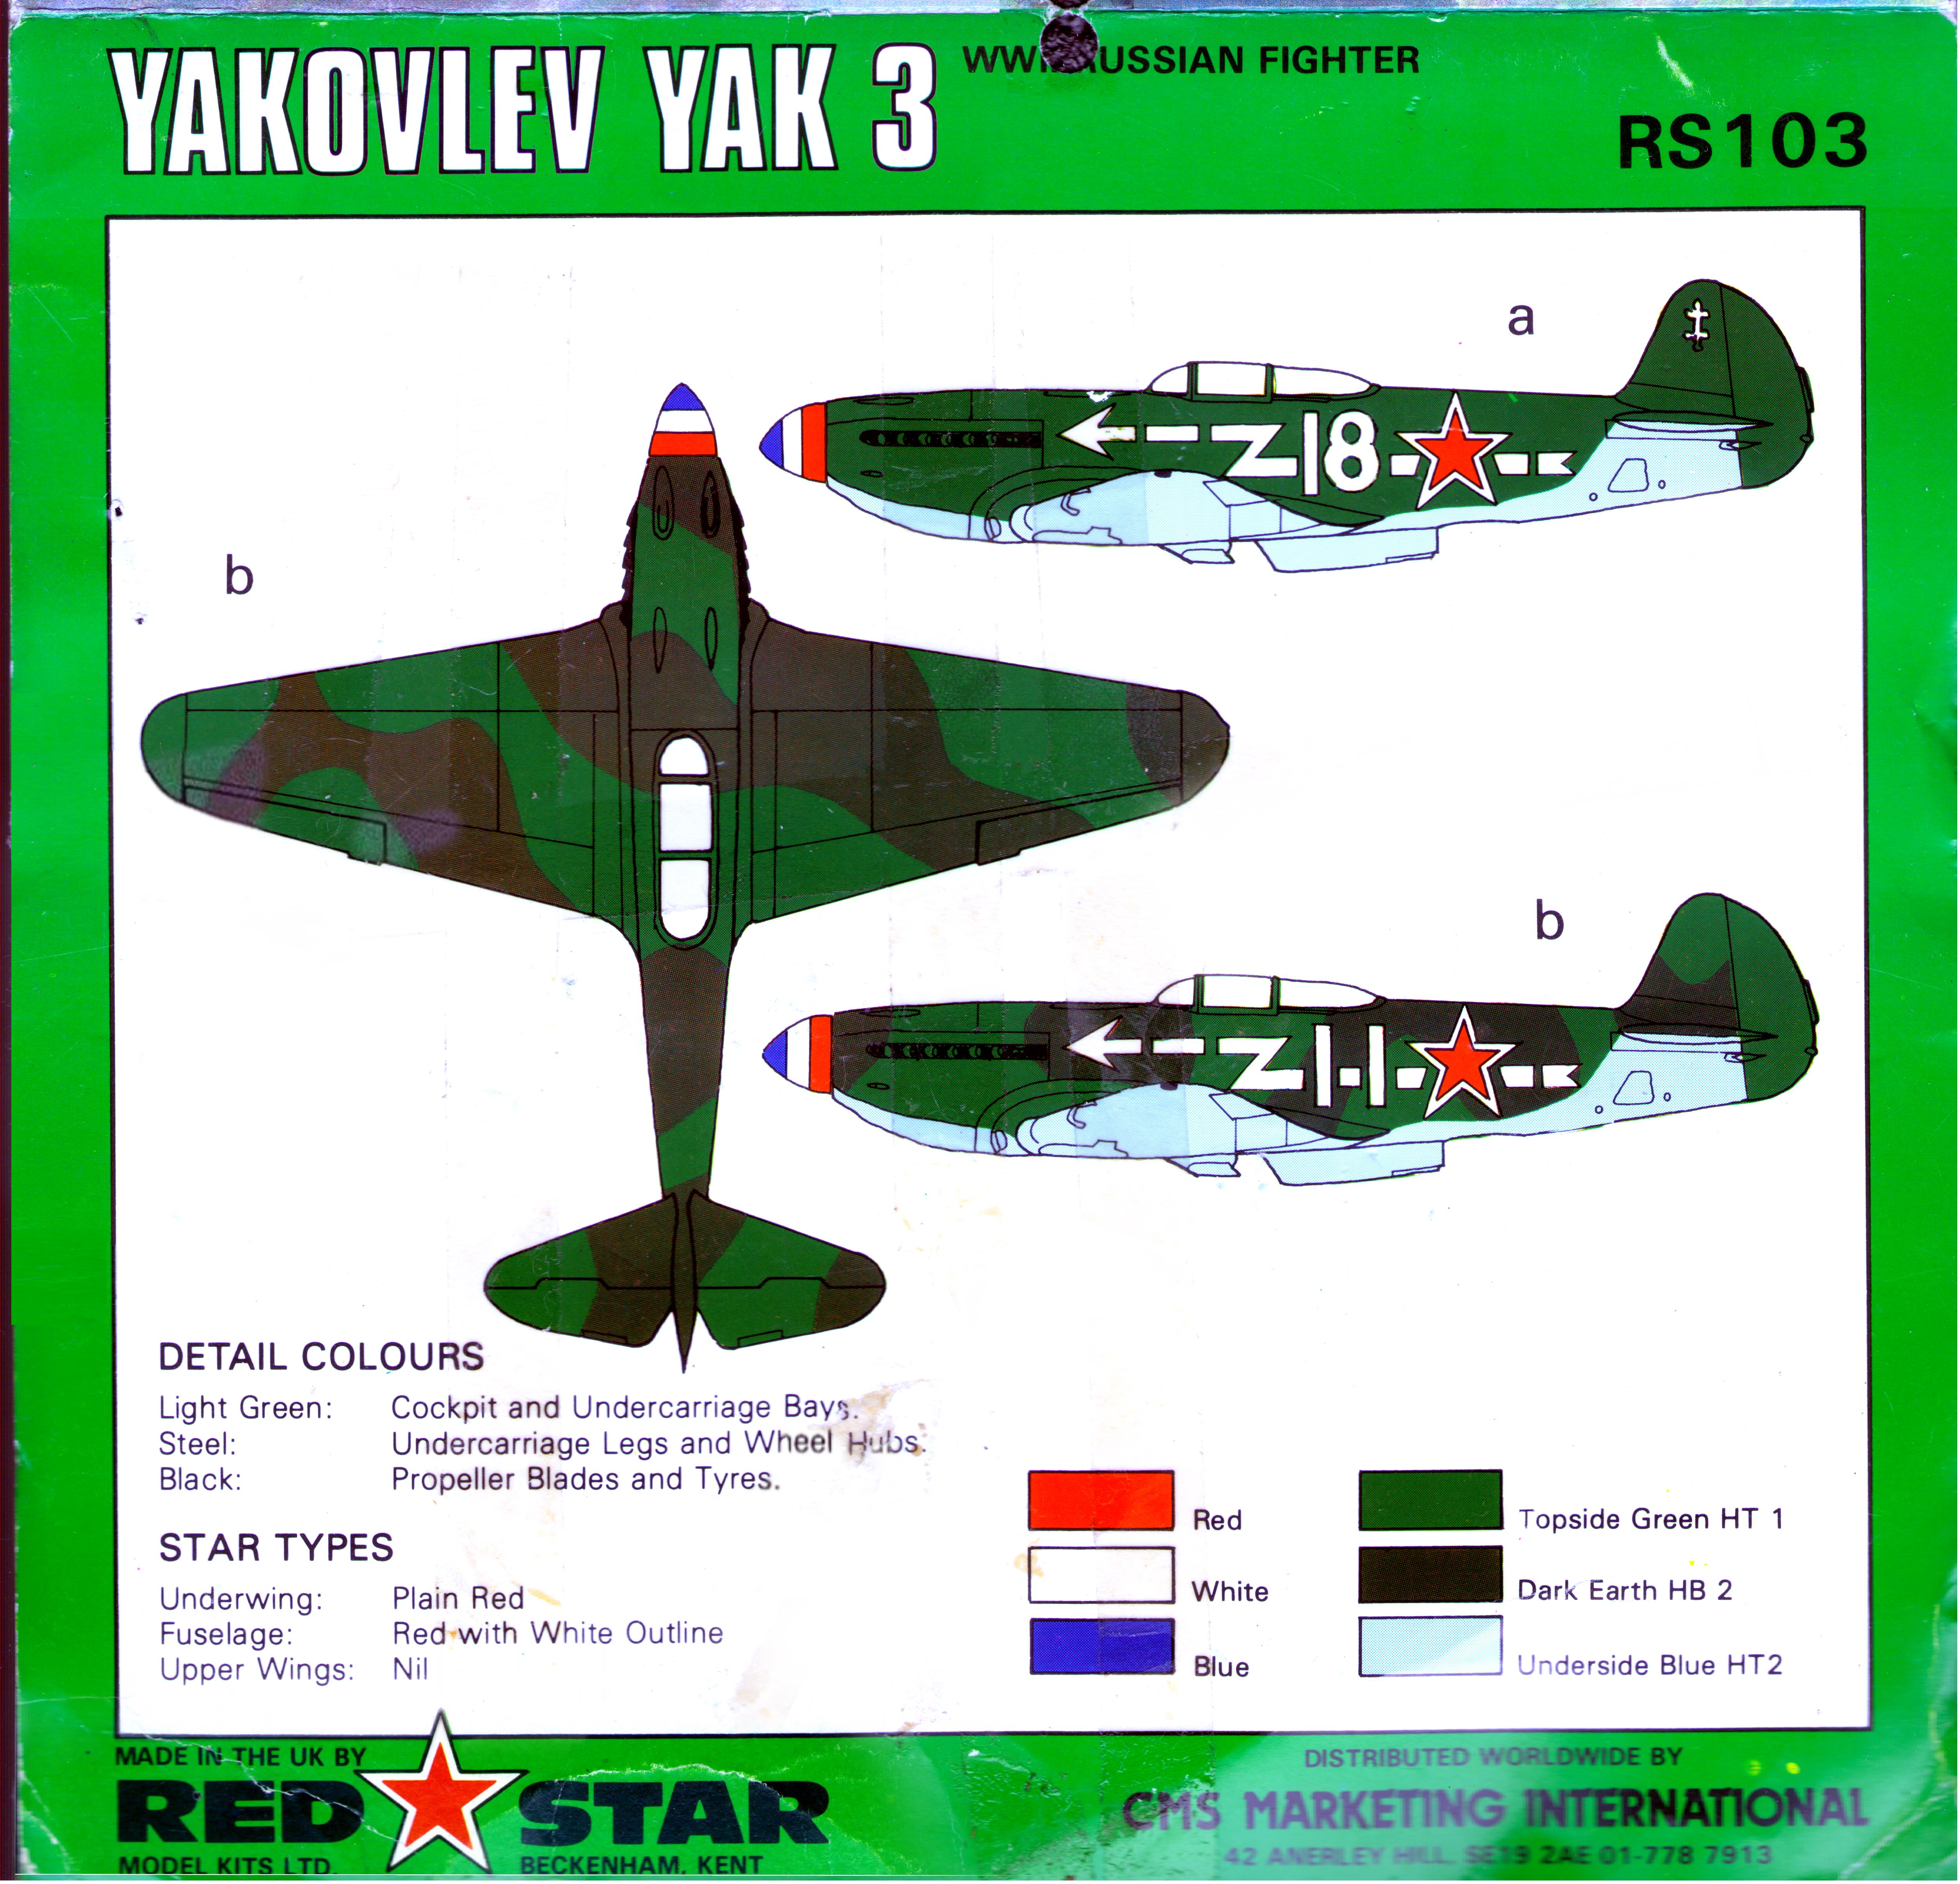 Red Star RS103 Yakovlev Yak-3, Red Star Model Kits Ltd, 1984 Colour painting guide